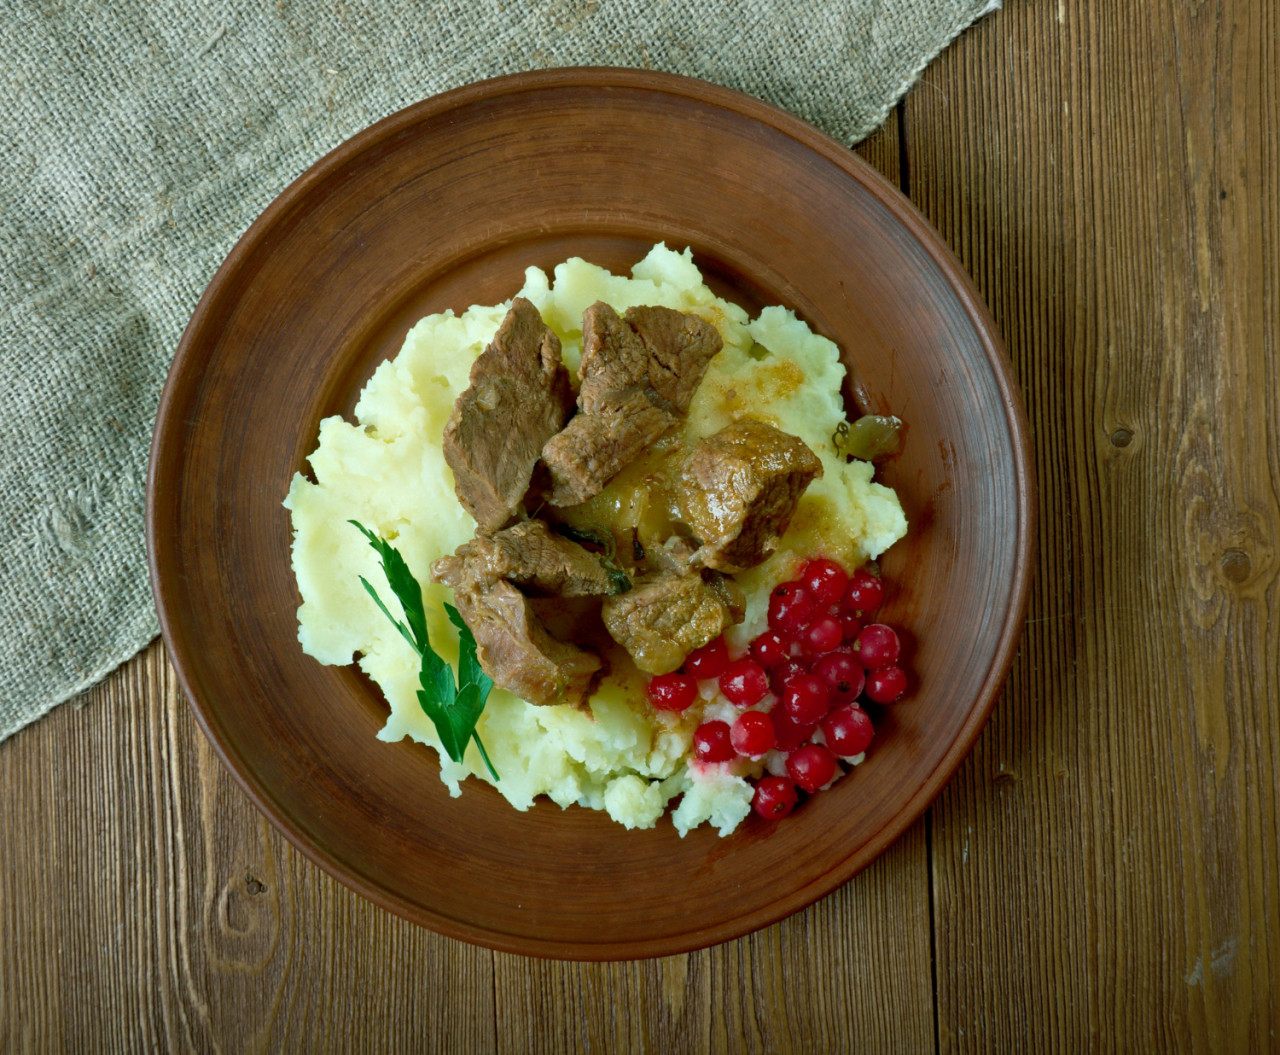 sauteed reindeer venison steak served with mashed potatoes lingonberry